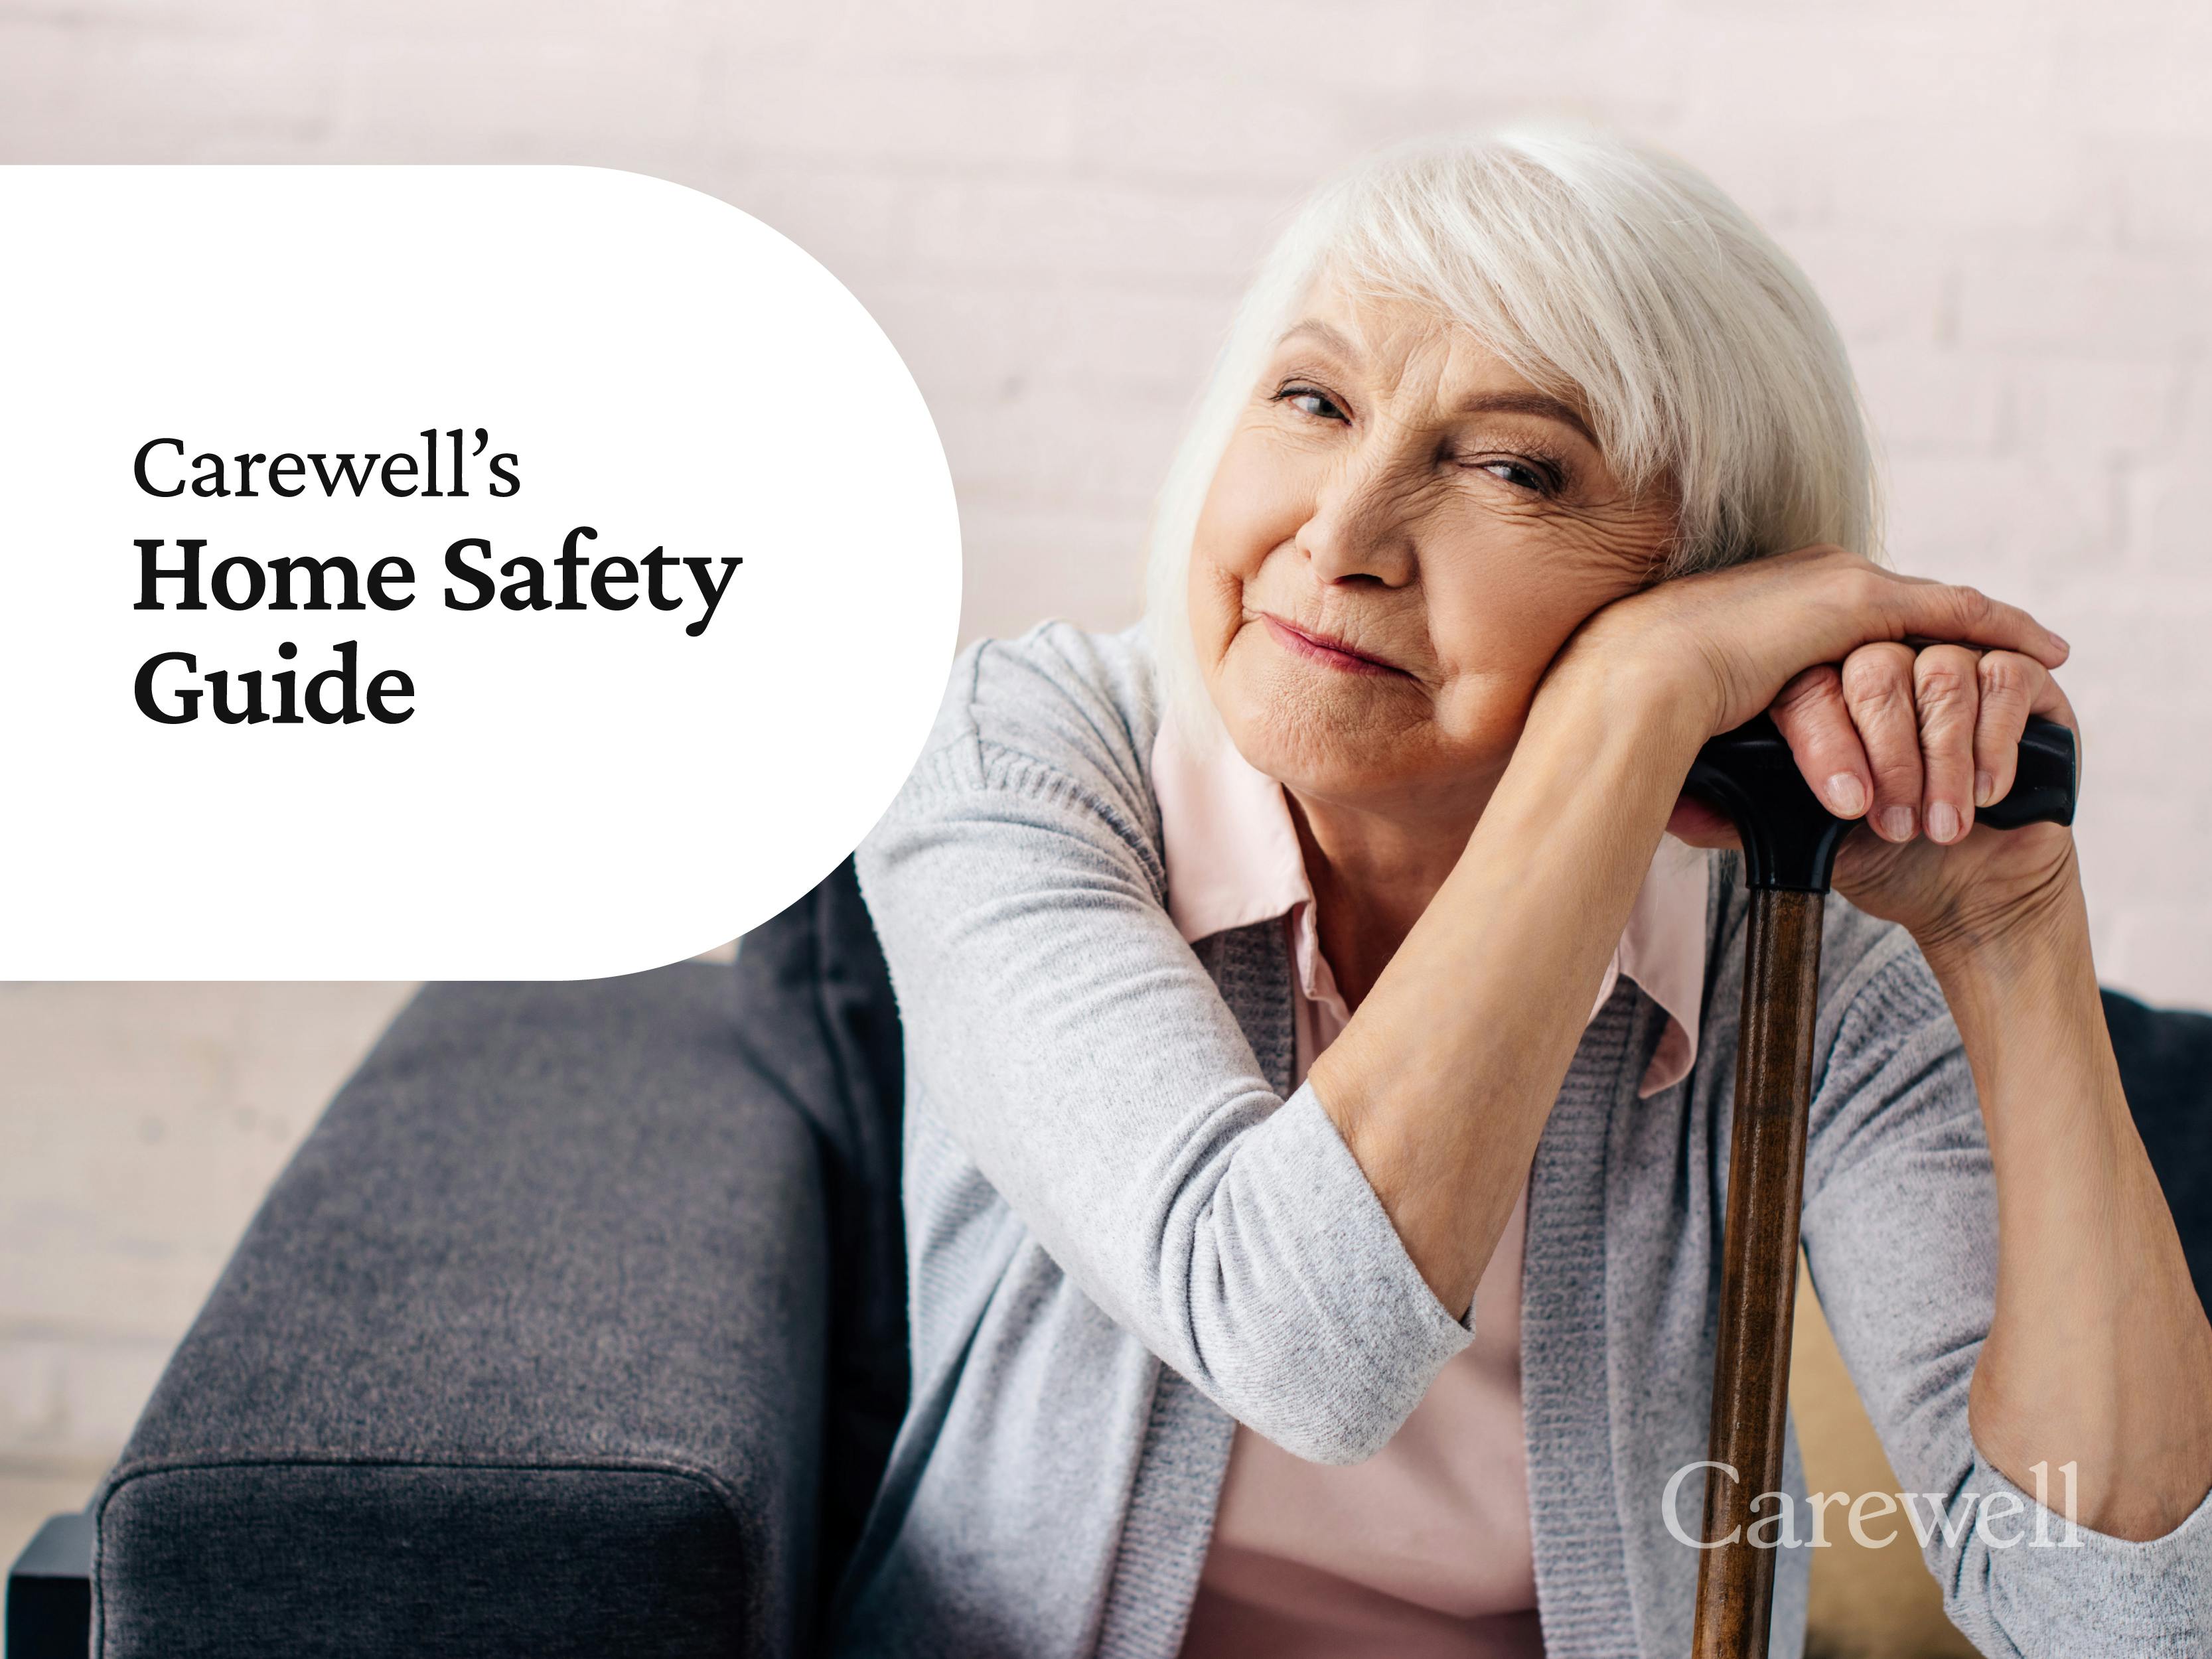 This guide will walk you through key products and considerations to help you safely set up your home to prevent falls in common areas. Whether your loved one is recovering from surgery, struggles to maintain balance, or has recently fallen and needs closer monitoring, we’ll guide you through the right products for your main living area, bedroom, and bathroom.